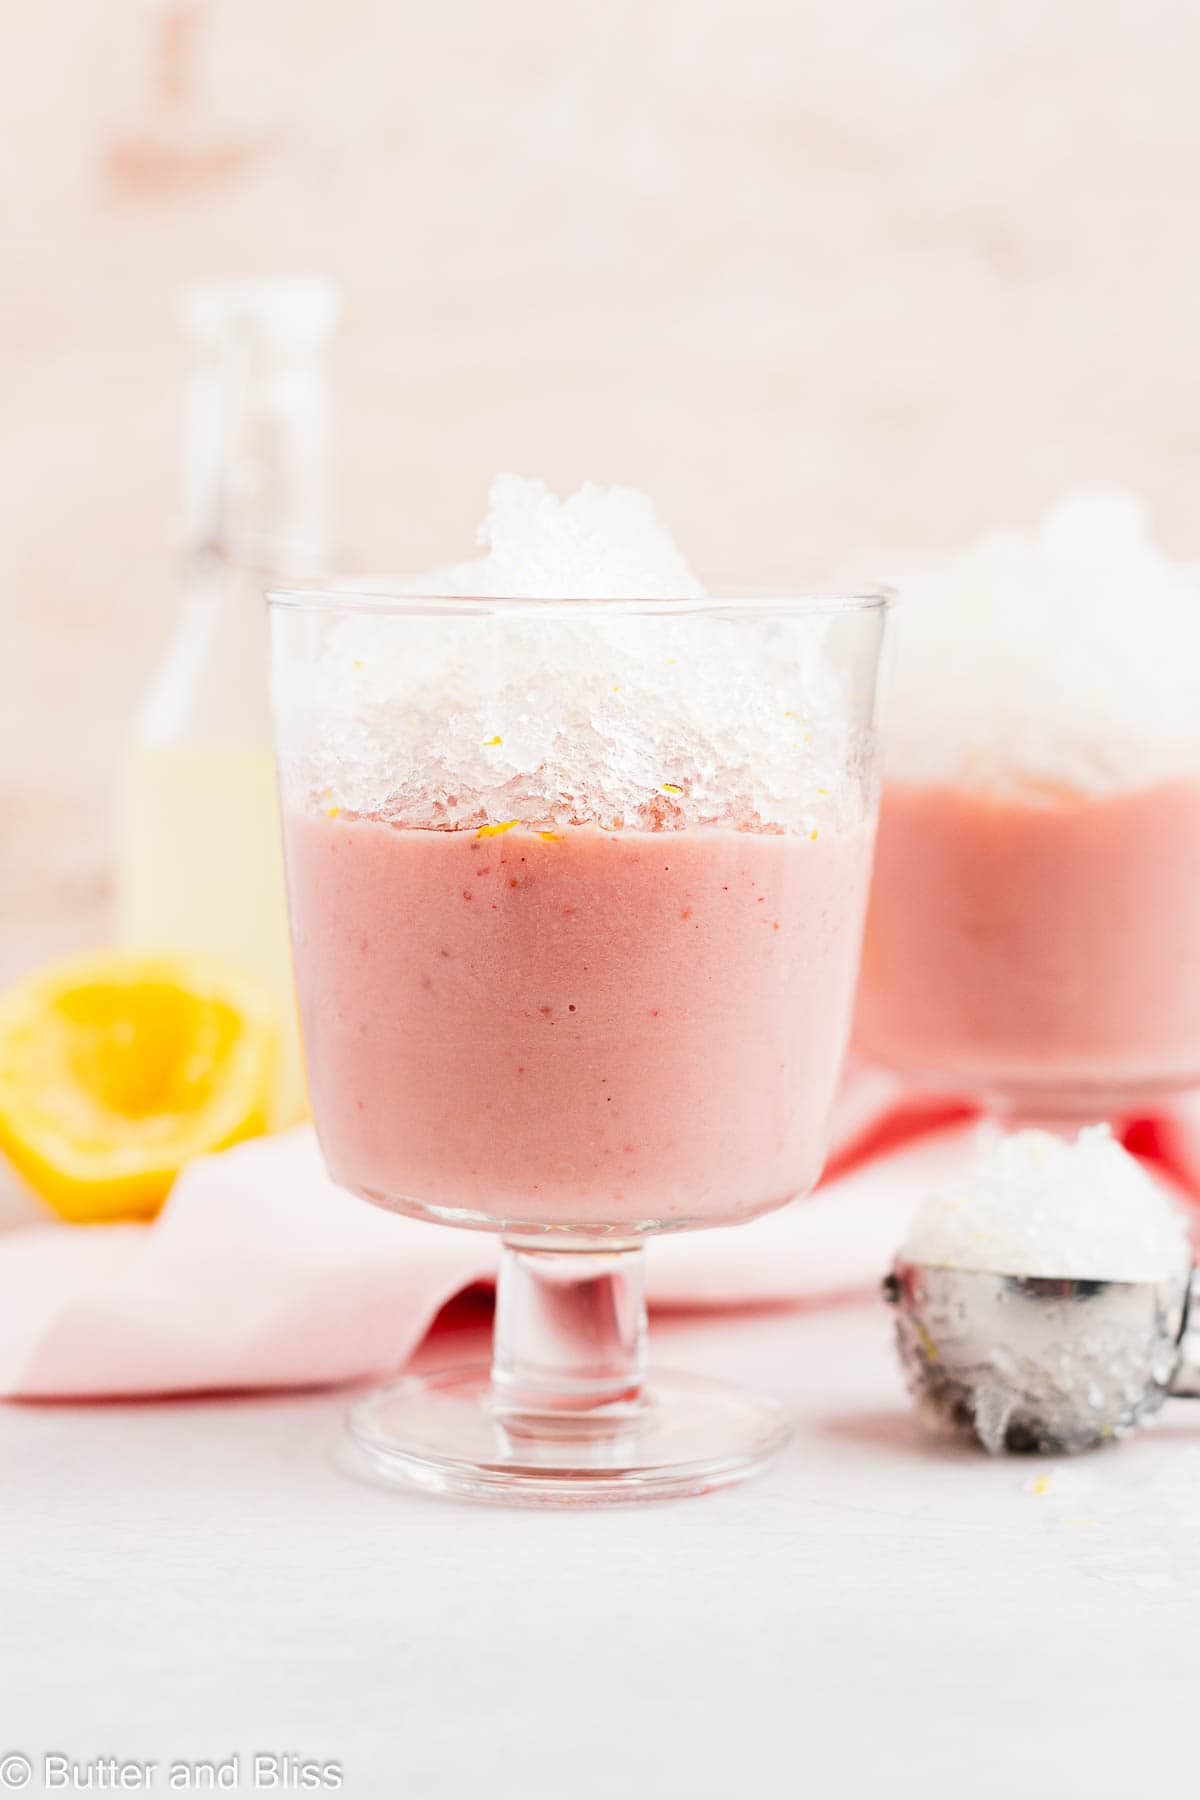 Layered lemonade granita and strawberry pudding in a parfait glass on a table.